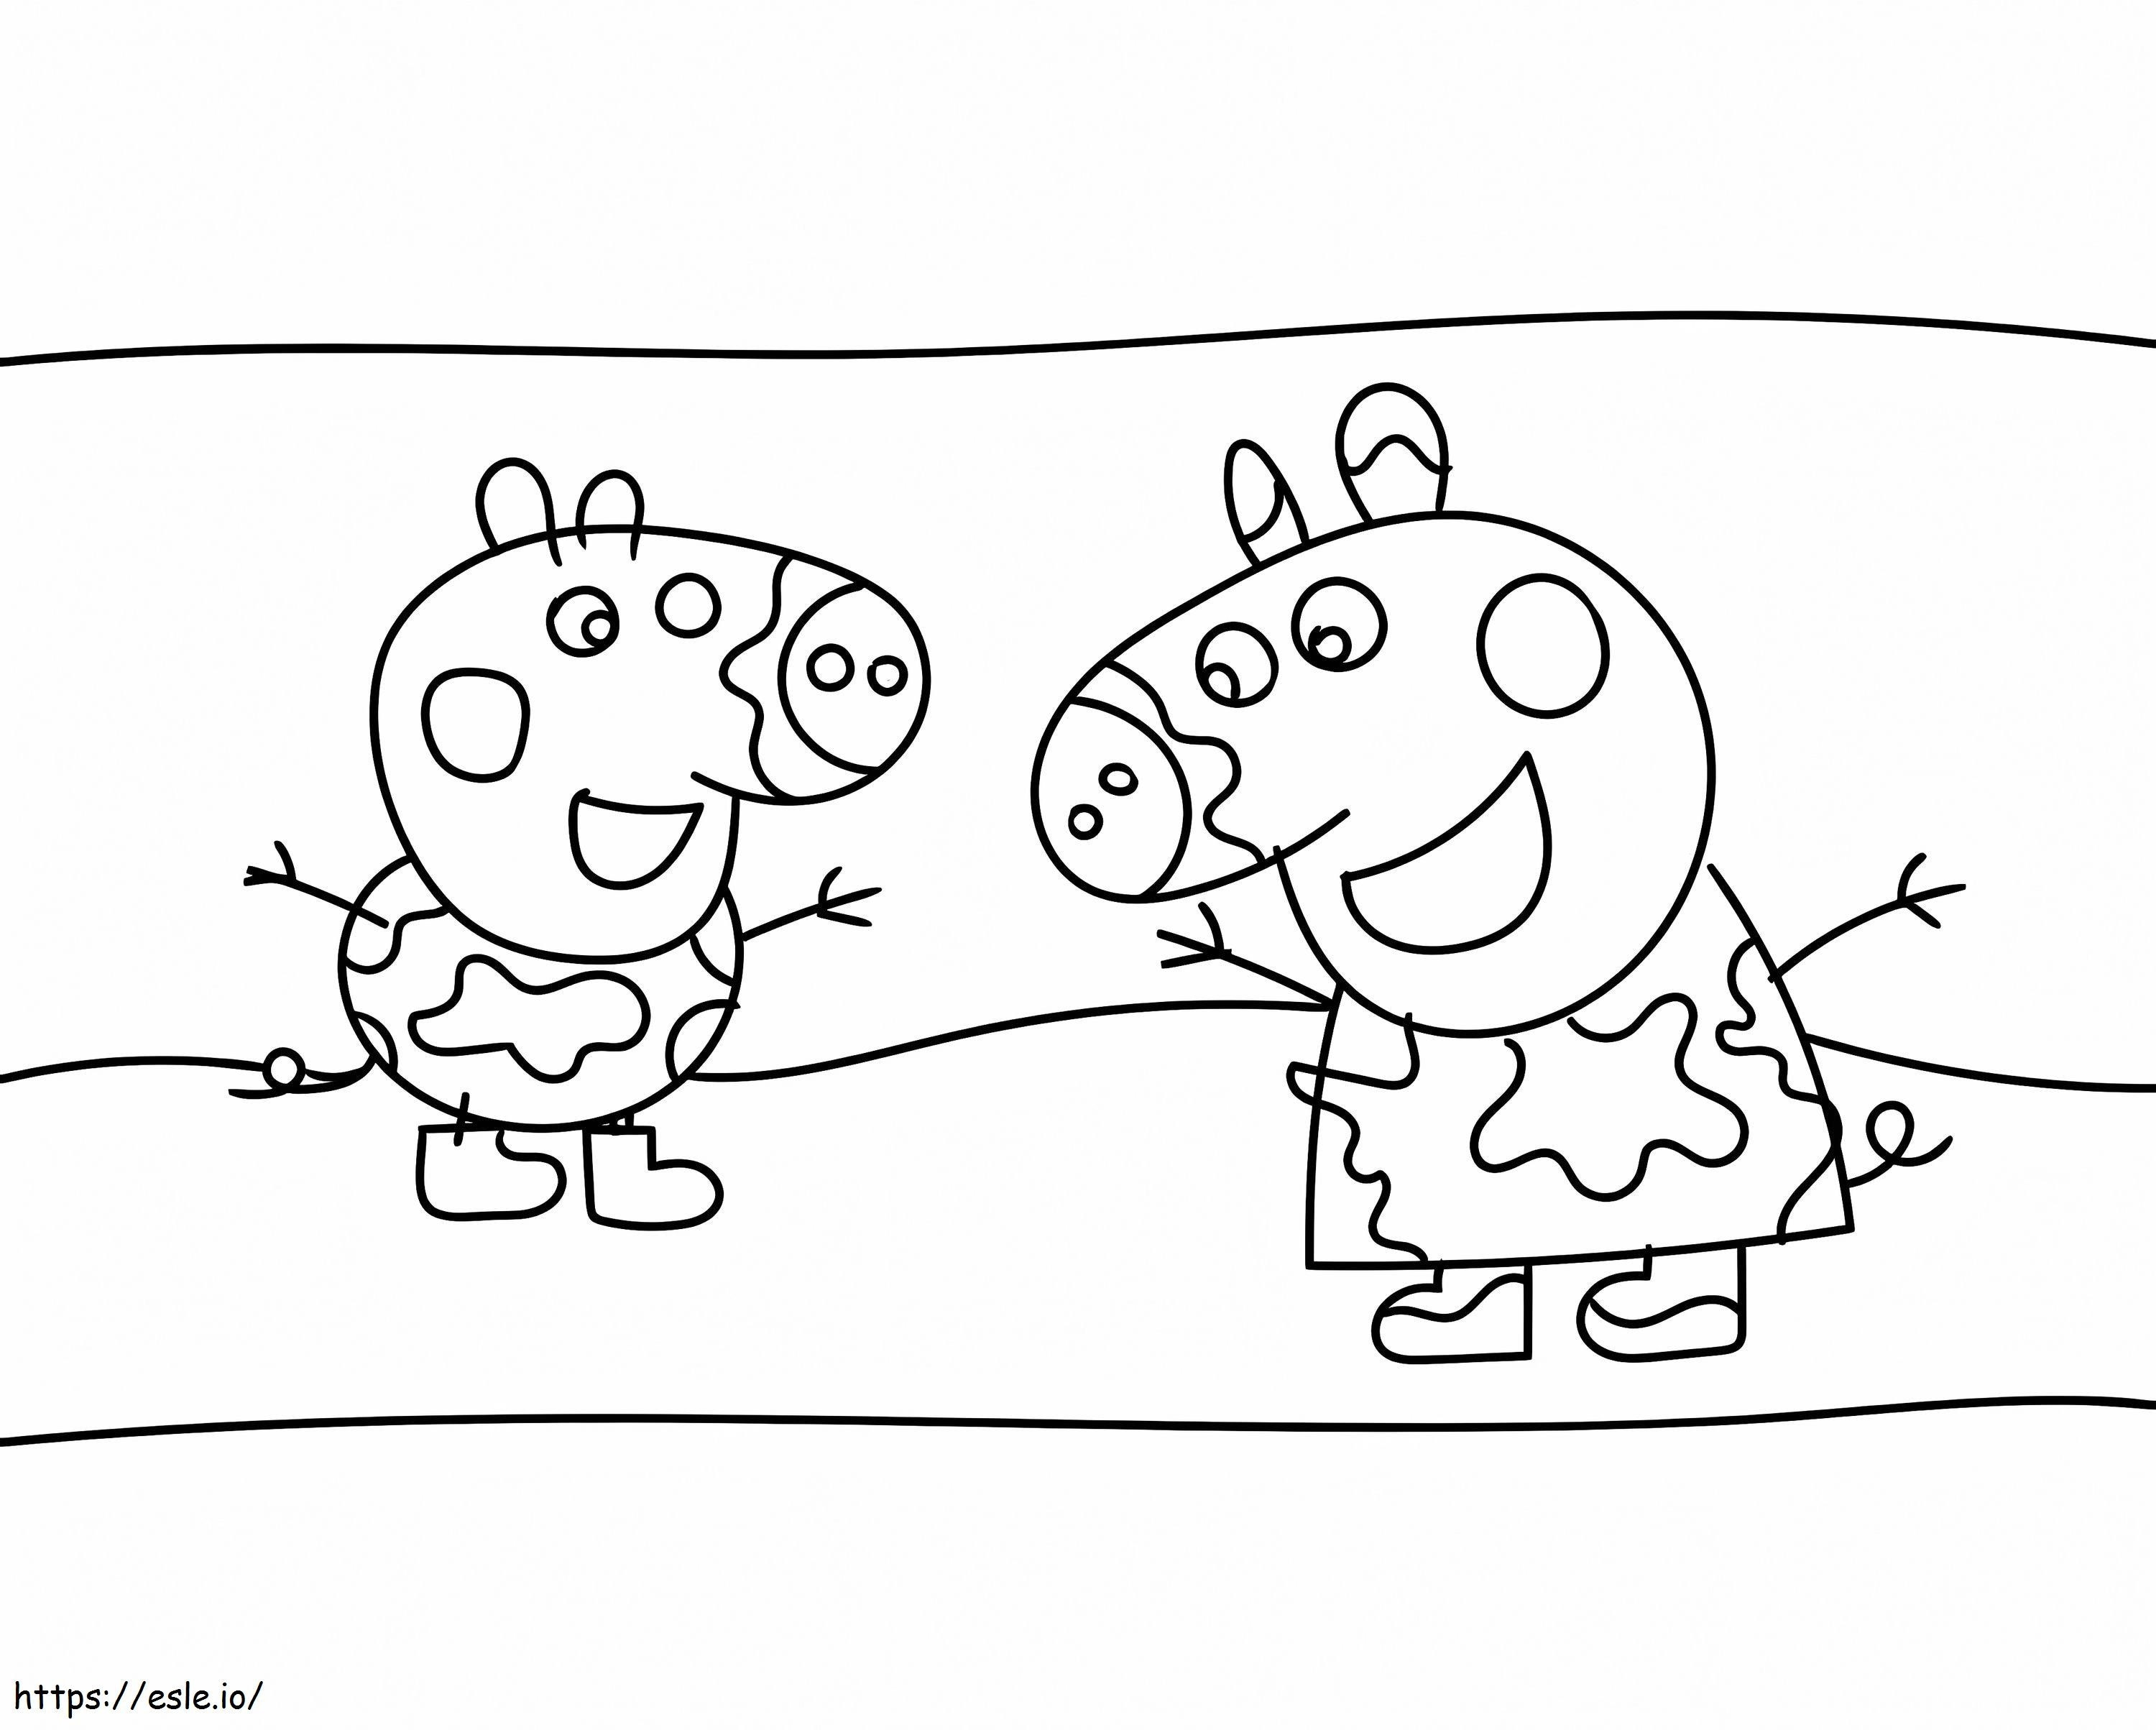 Peppa Pig 2 1 coloring page